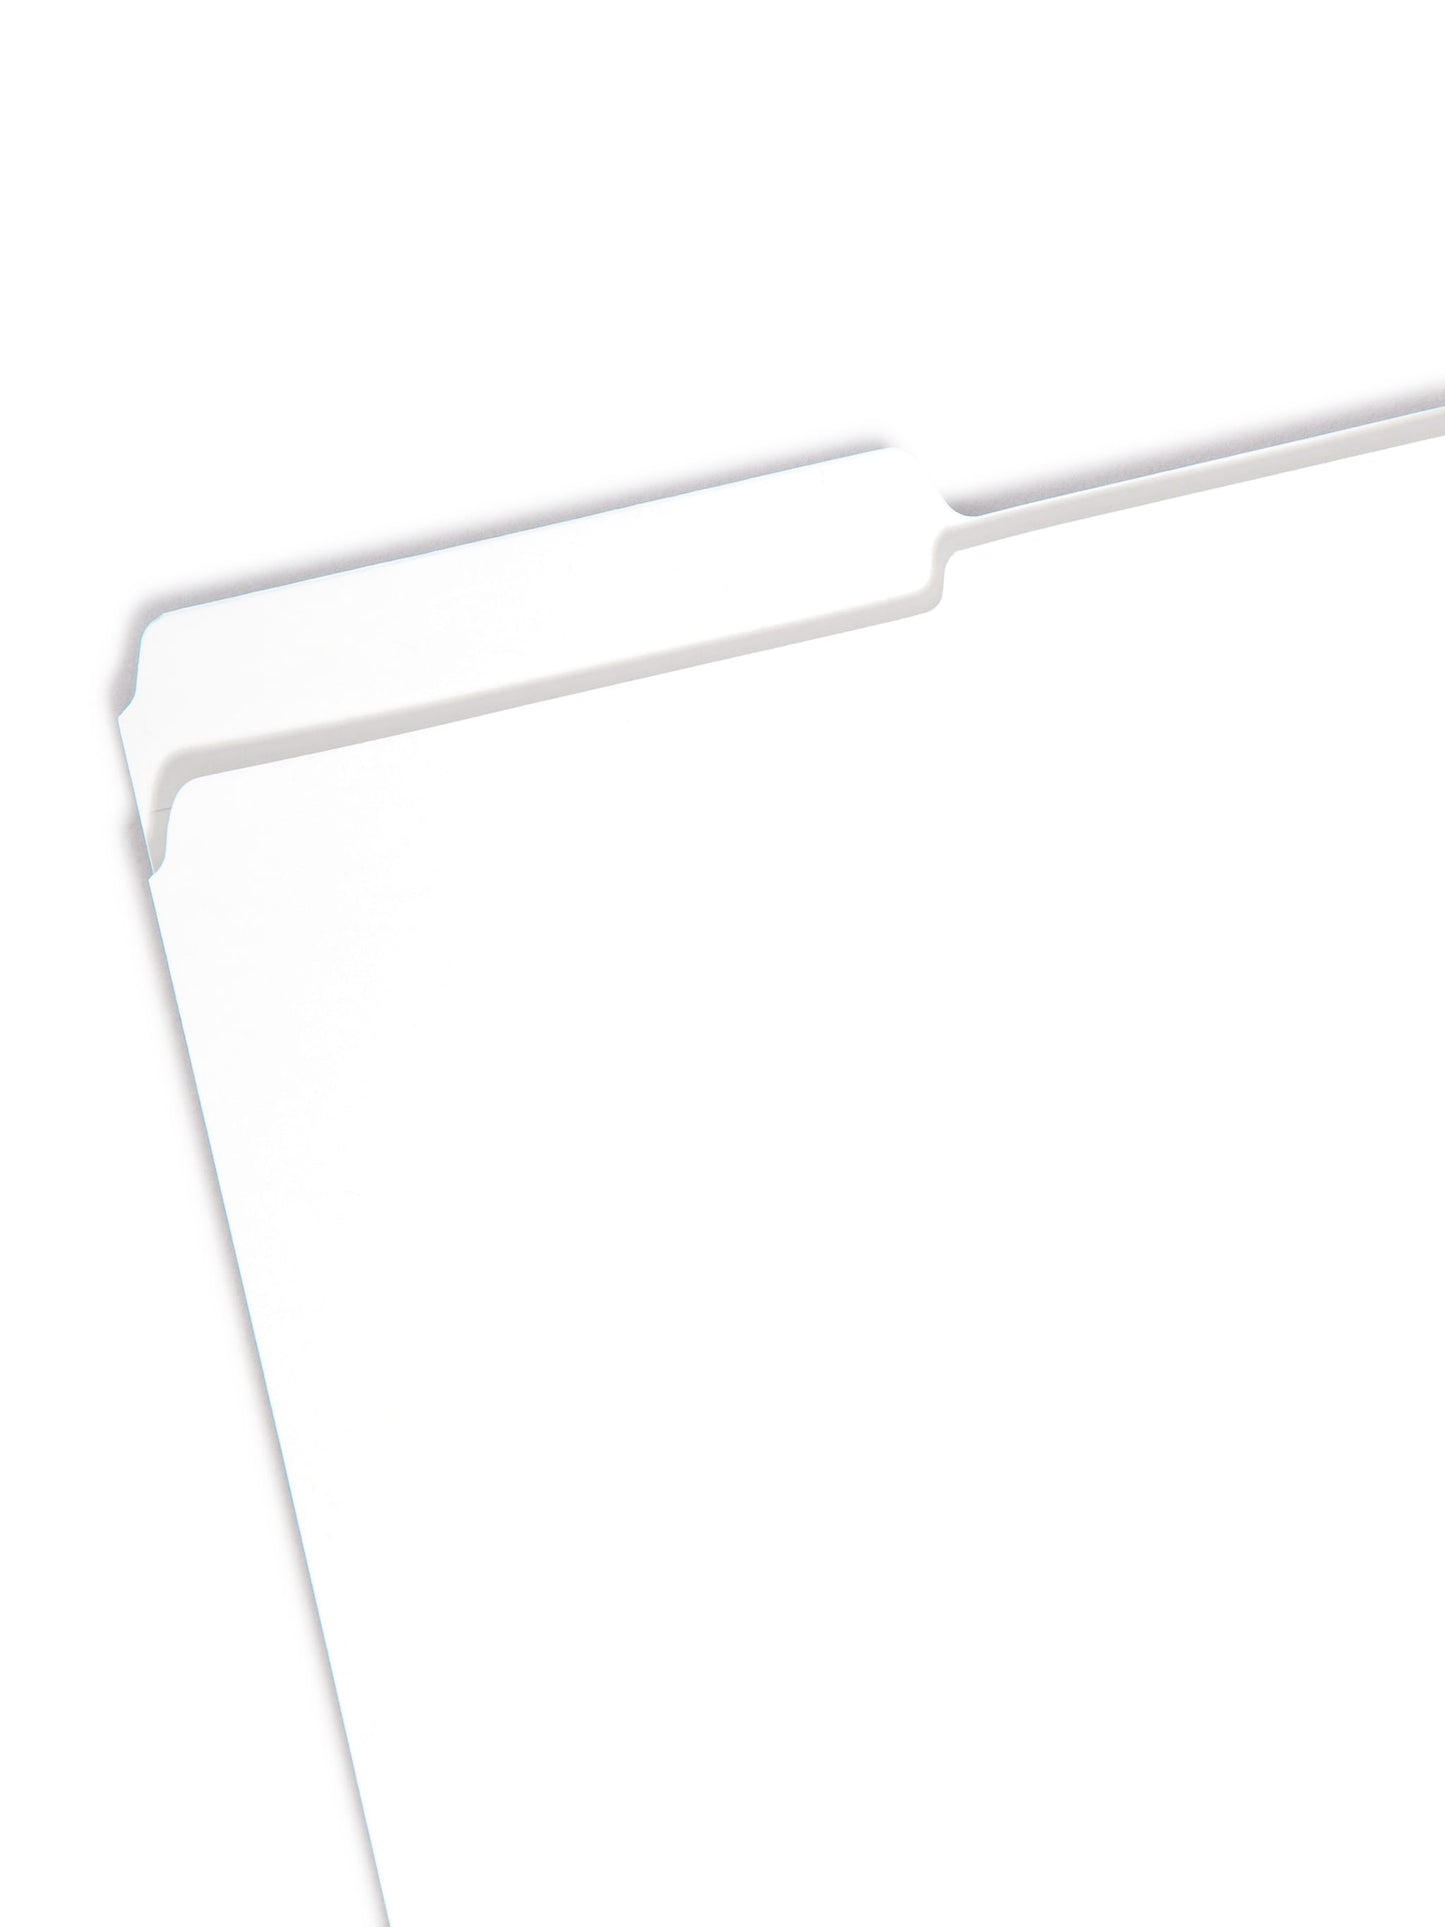 Reinforced Tab File Folders, 1/3-Cut Tab, White Color, Legal Size, Set of 100, 086486178341